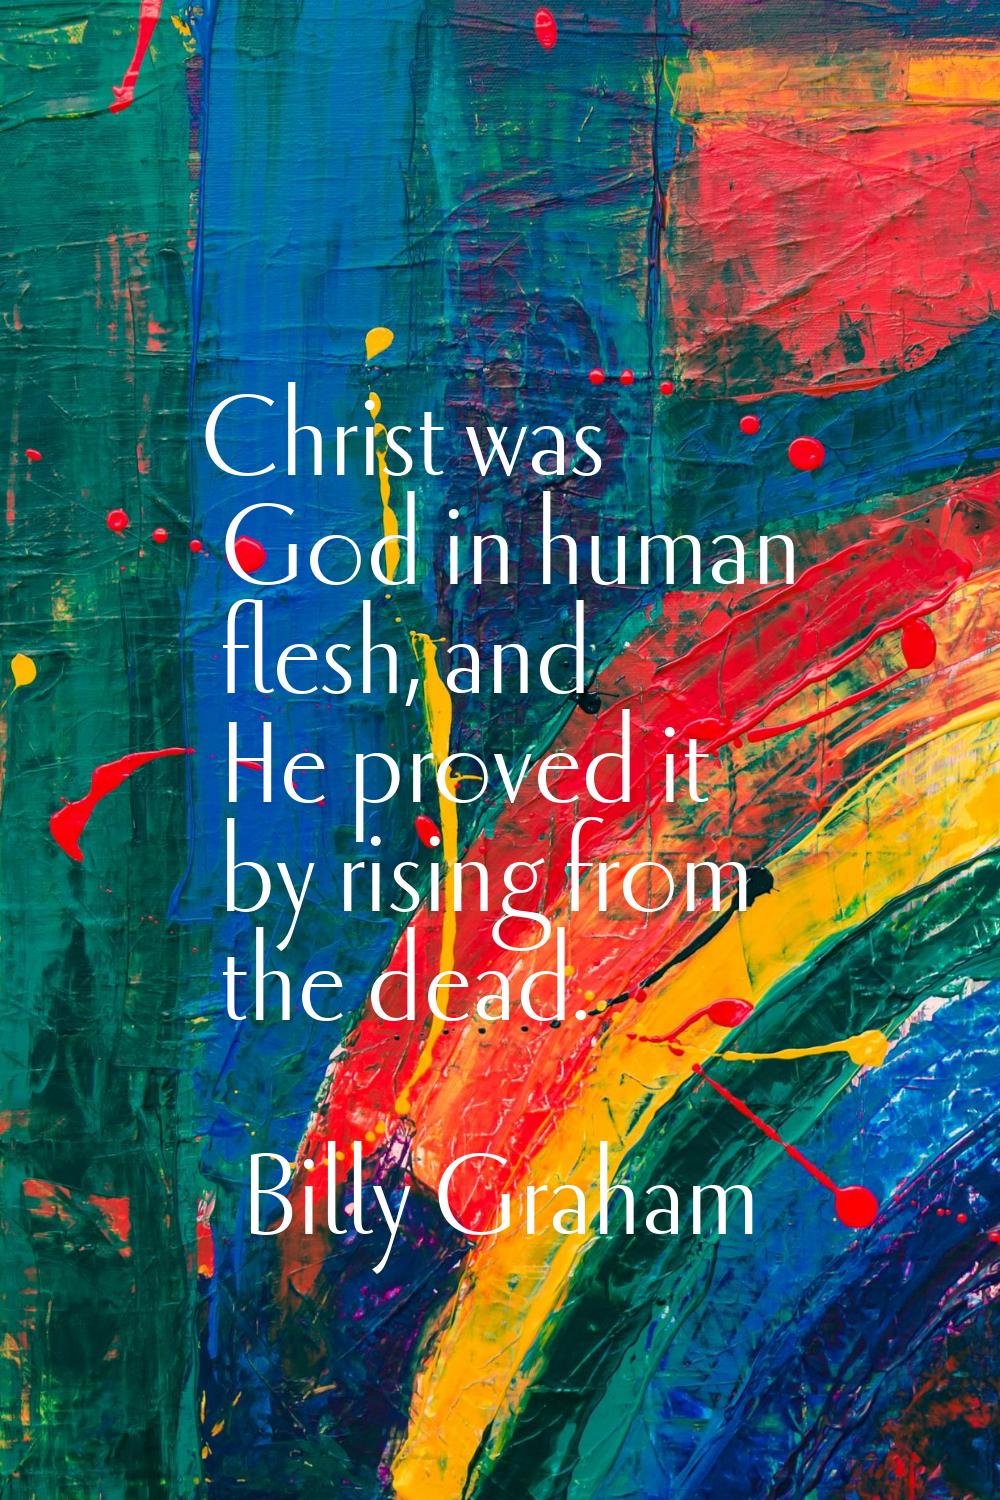 Christ was God in human flesh, and He proved it by rising from the dead.